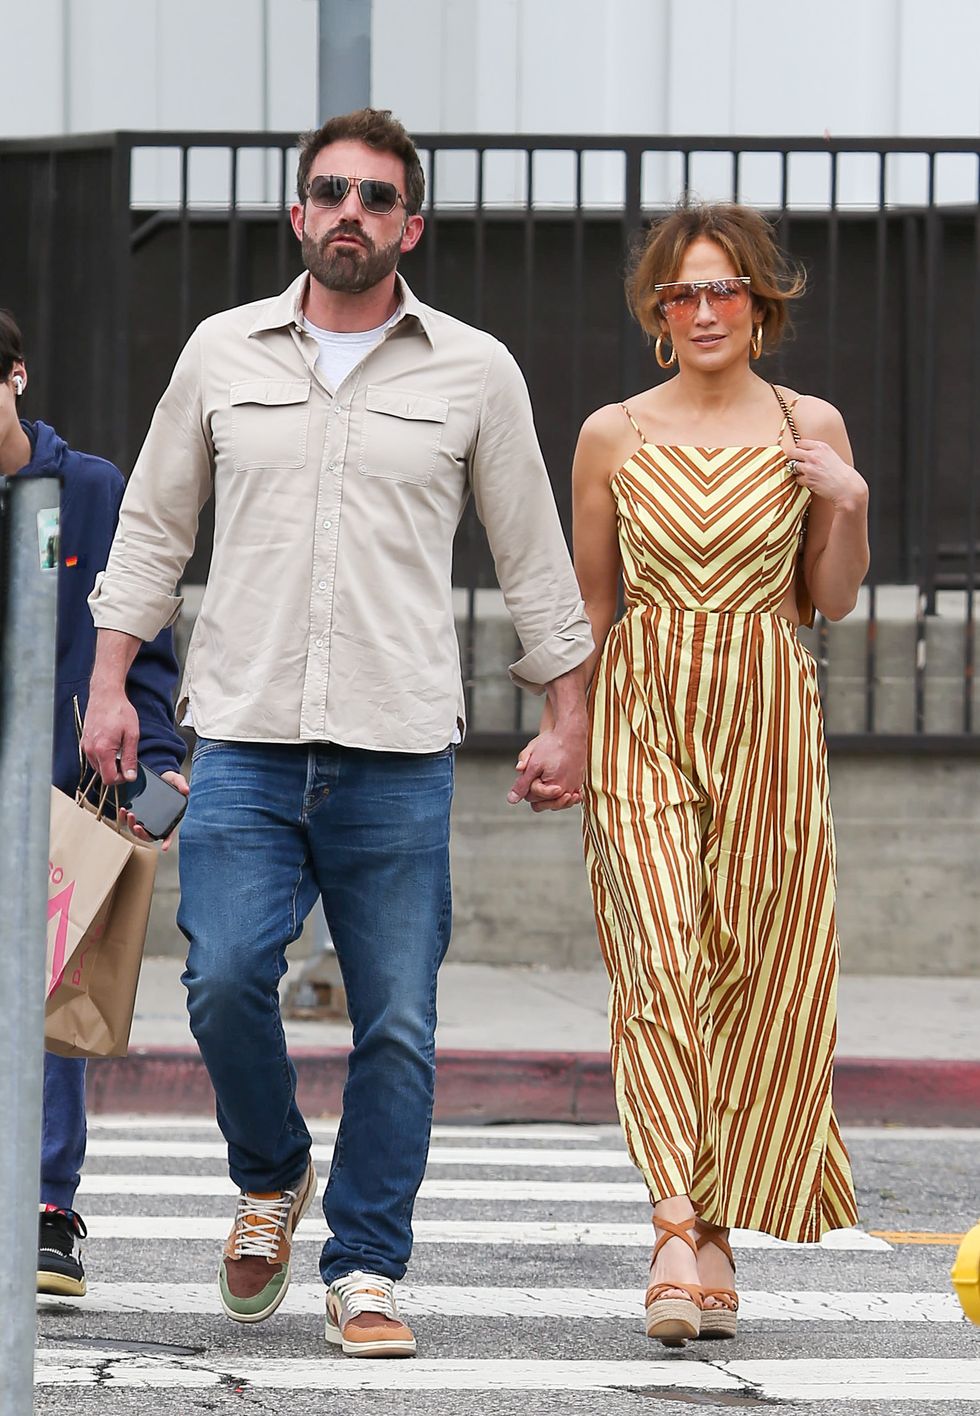 los angeles, ca may 20 ben affleck and jennifer lopez are seen on may 20, 2023 in los angeles, california photo by thecelebrityfinderbauer griffingc images